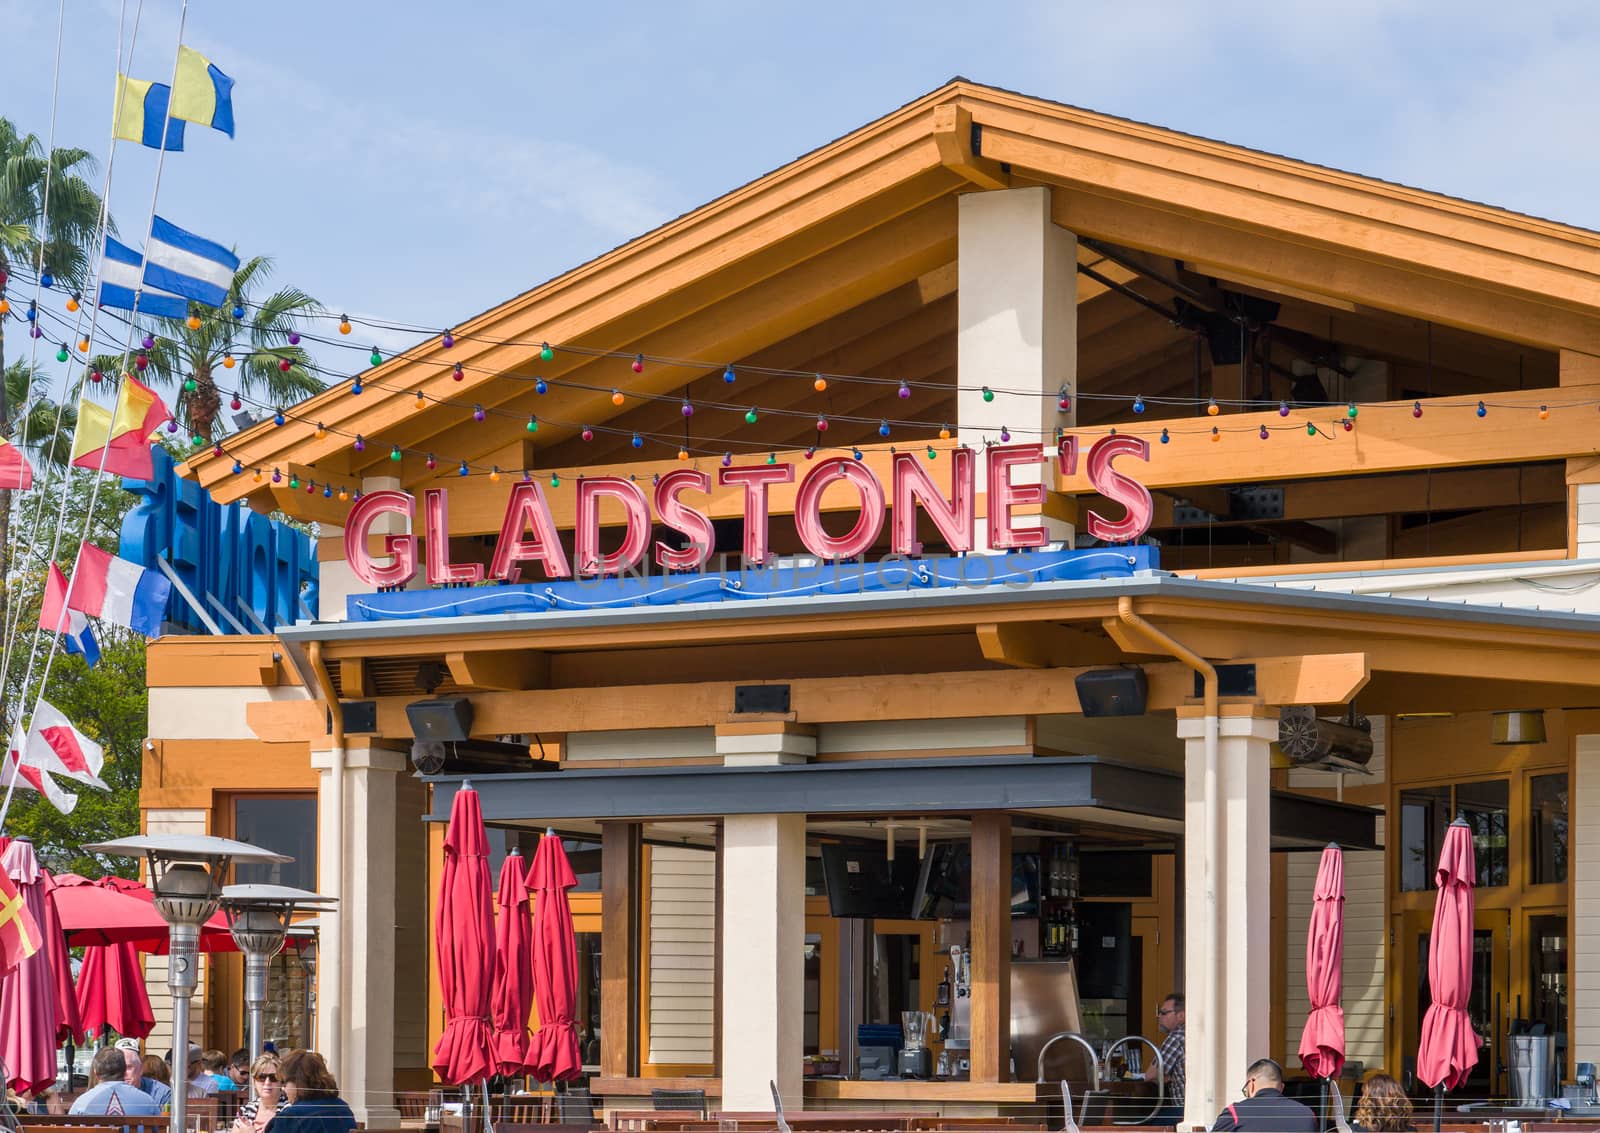 LONG BEACH, CA/USA - MARCH 19, 2016: Gladstone's restauraunt exterior and sign. Gladstone's is an open air restaurant at the Long Beach Harbor.